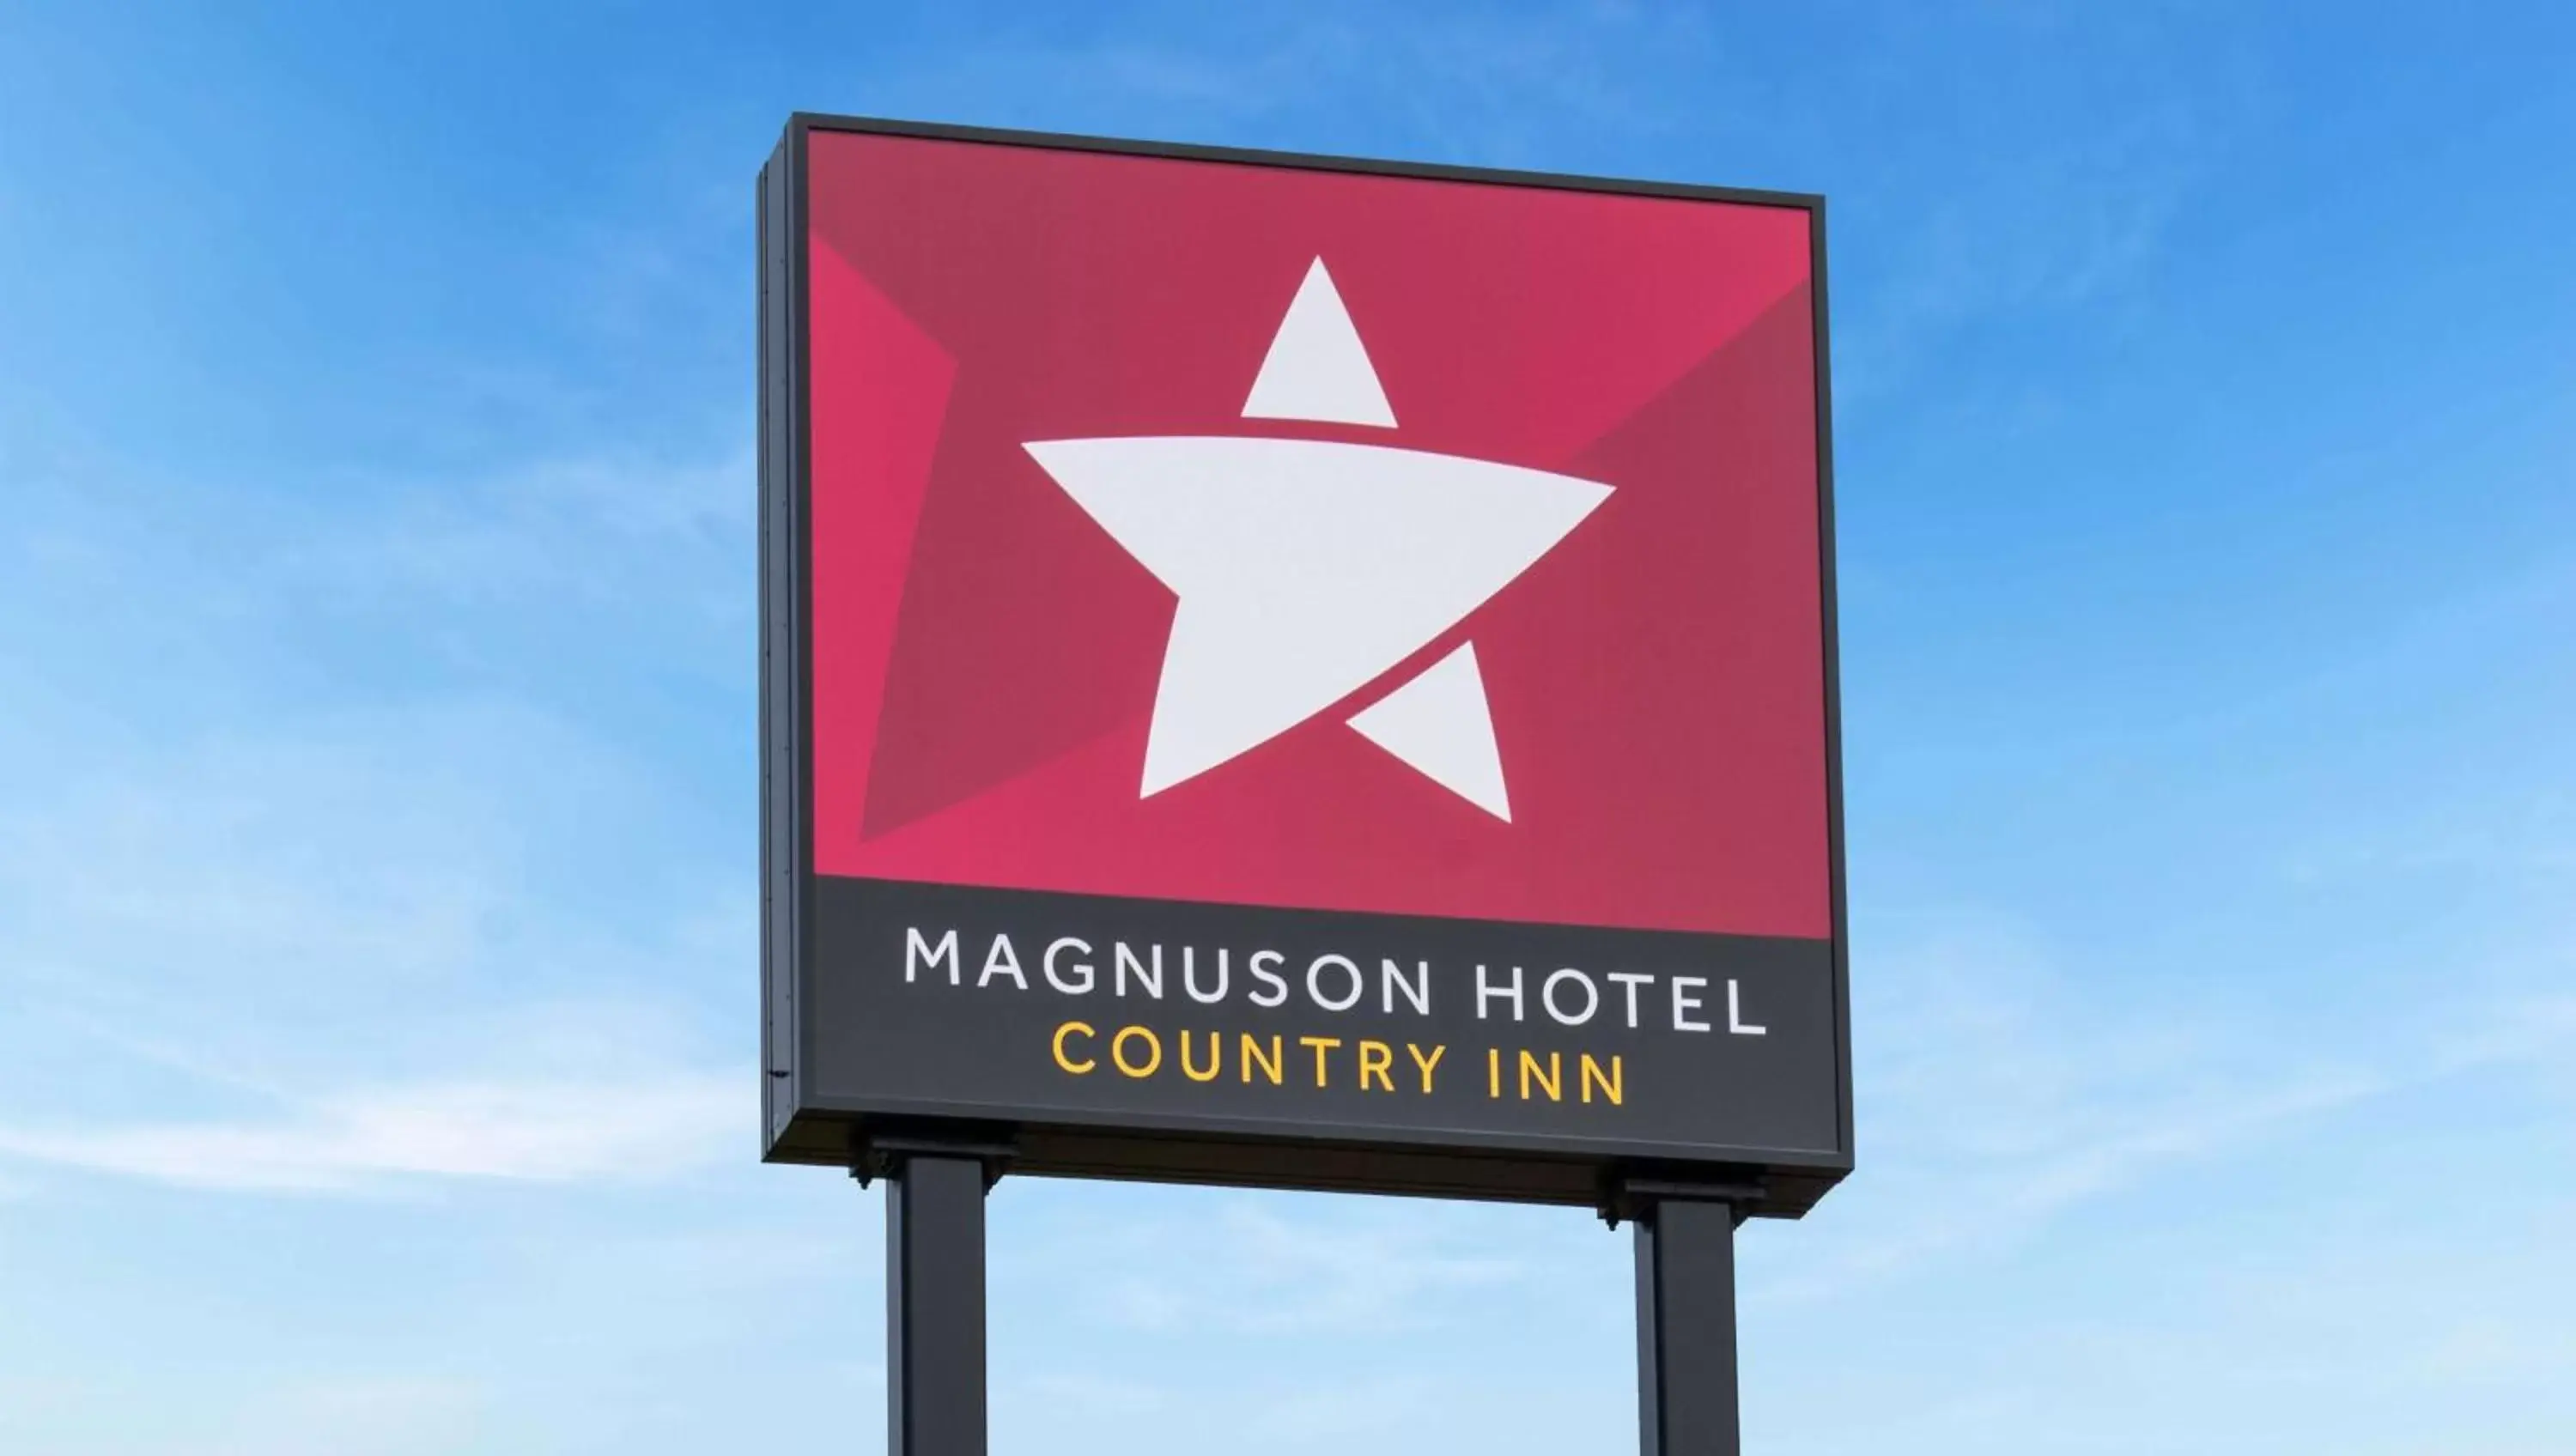 Property building in Magnuson Hotel Country Inn